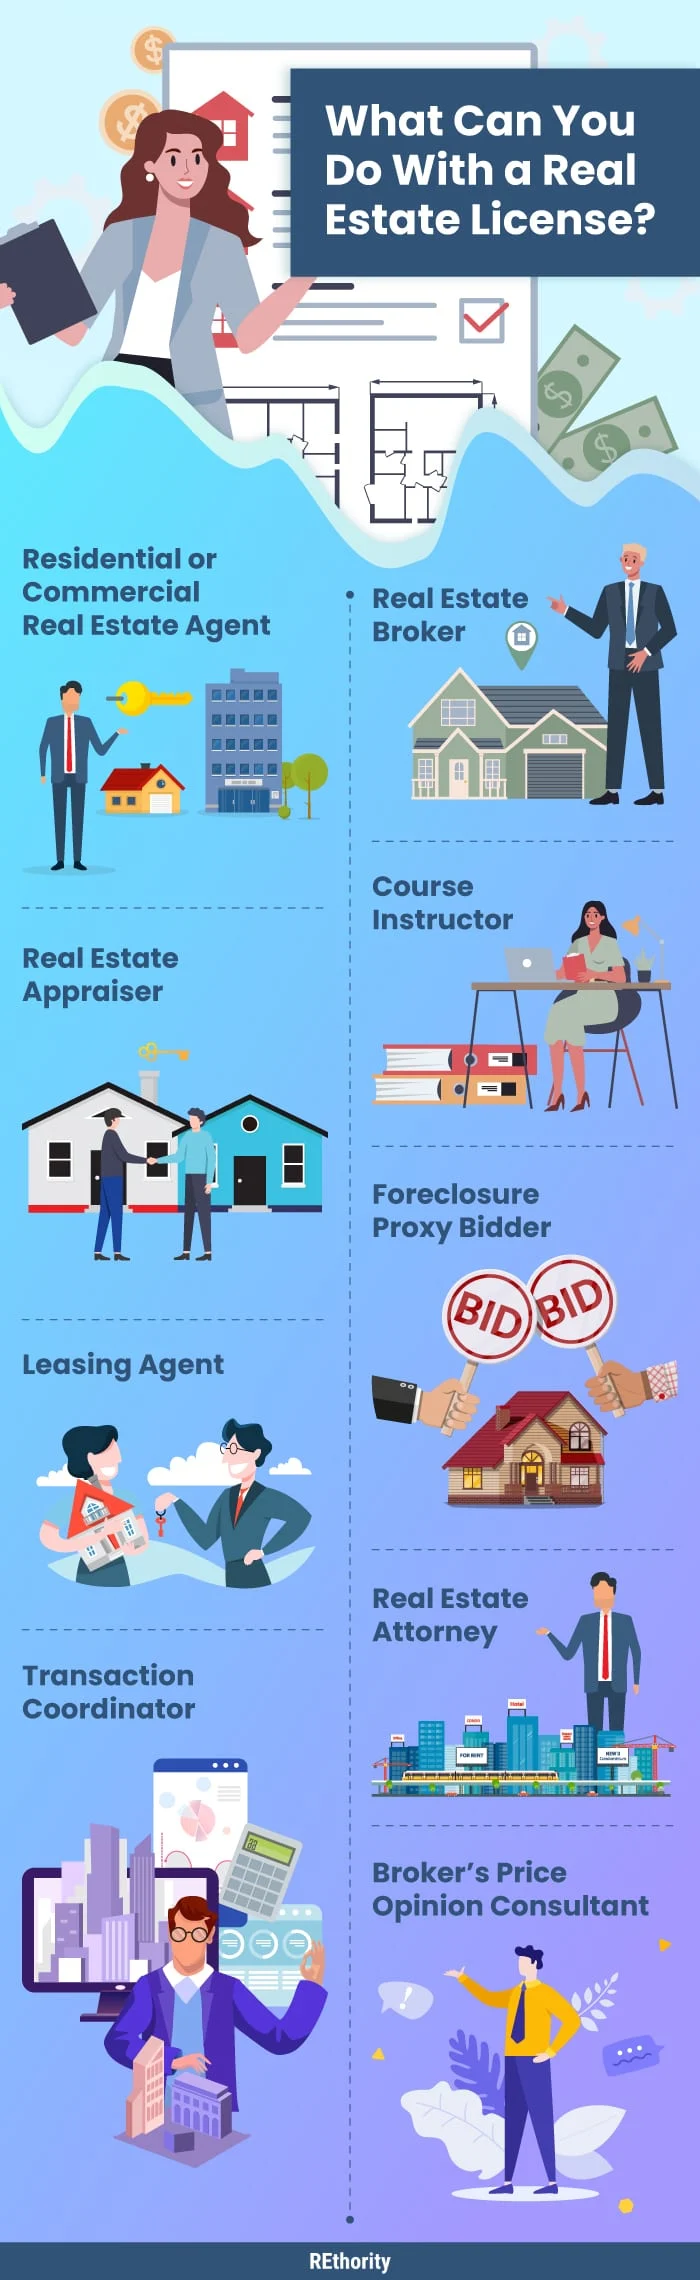 What can you do with a real estate license infographic